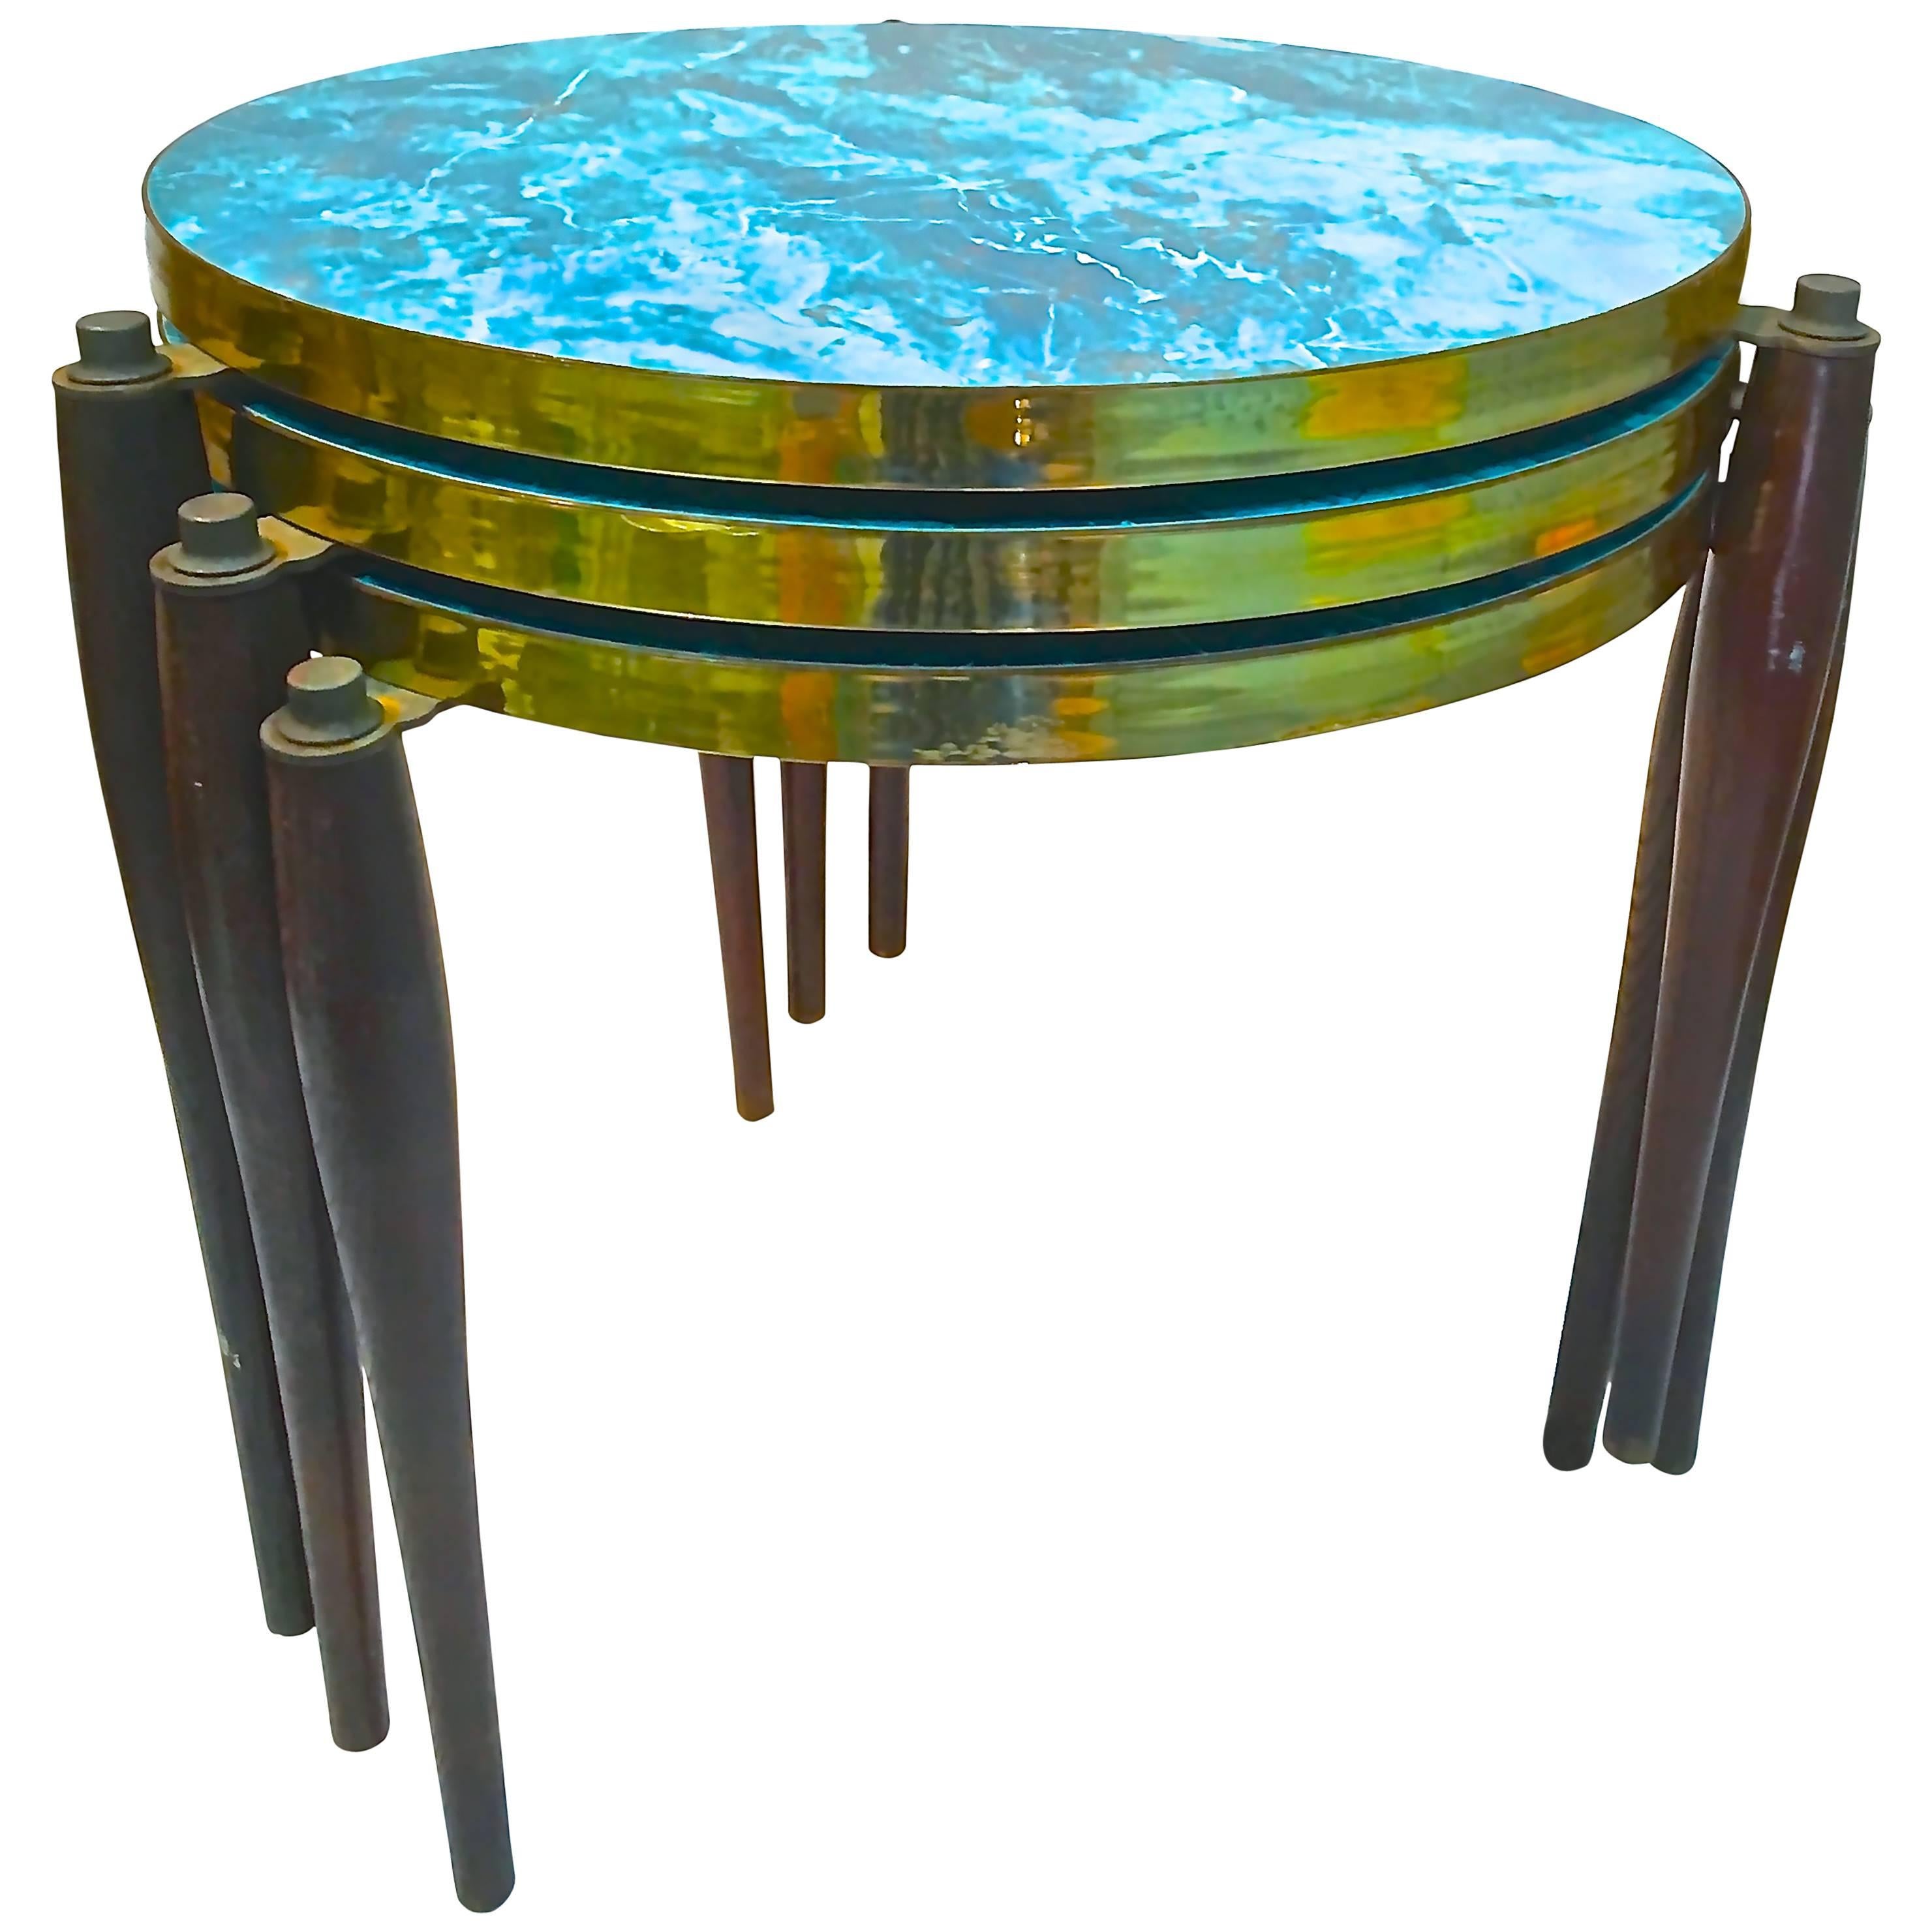 1950s Stacking Tables in Aqua Laminate with Brass Details